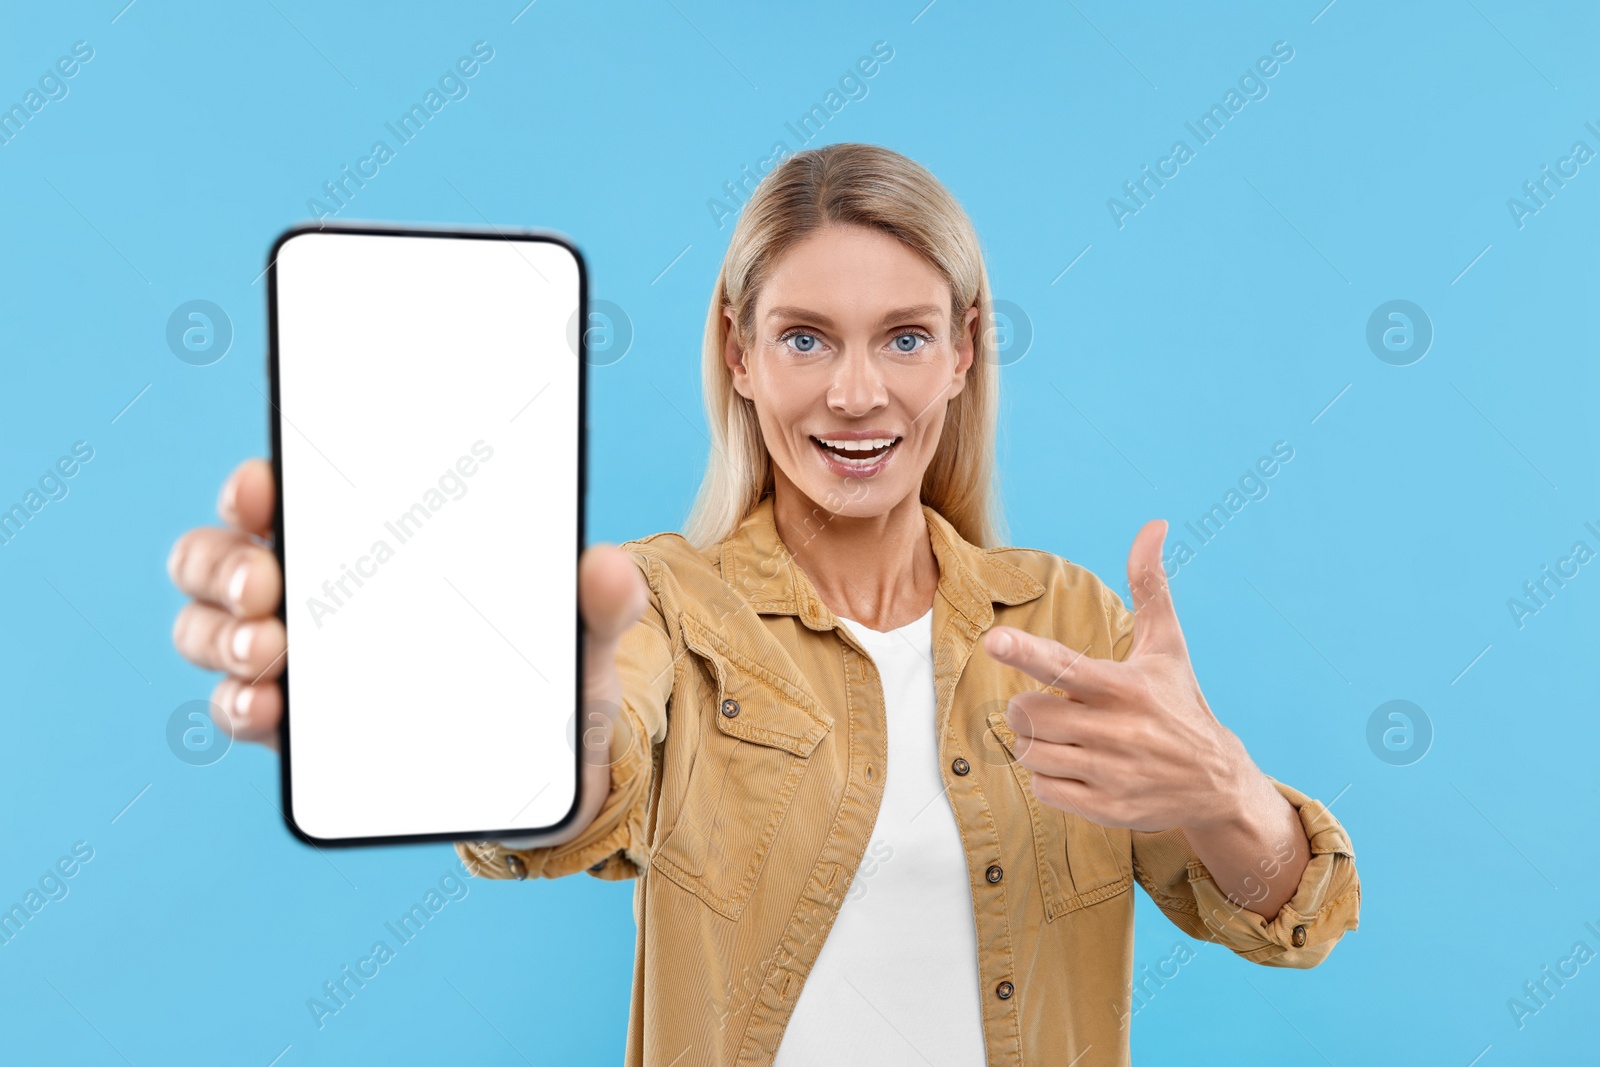 Photo of Happy woman holding smartphone and pointing at blank screen on light blue background